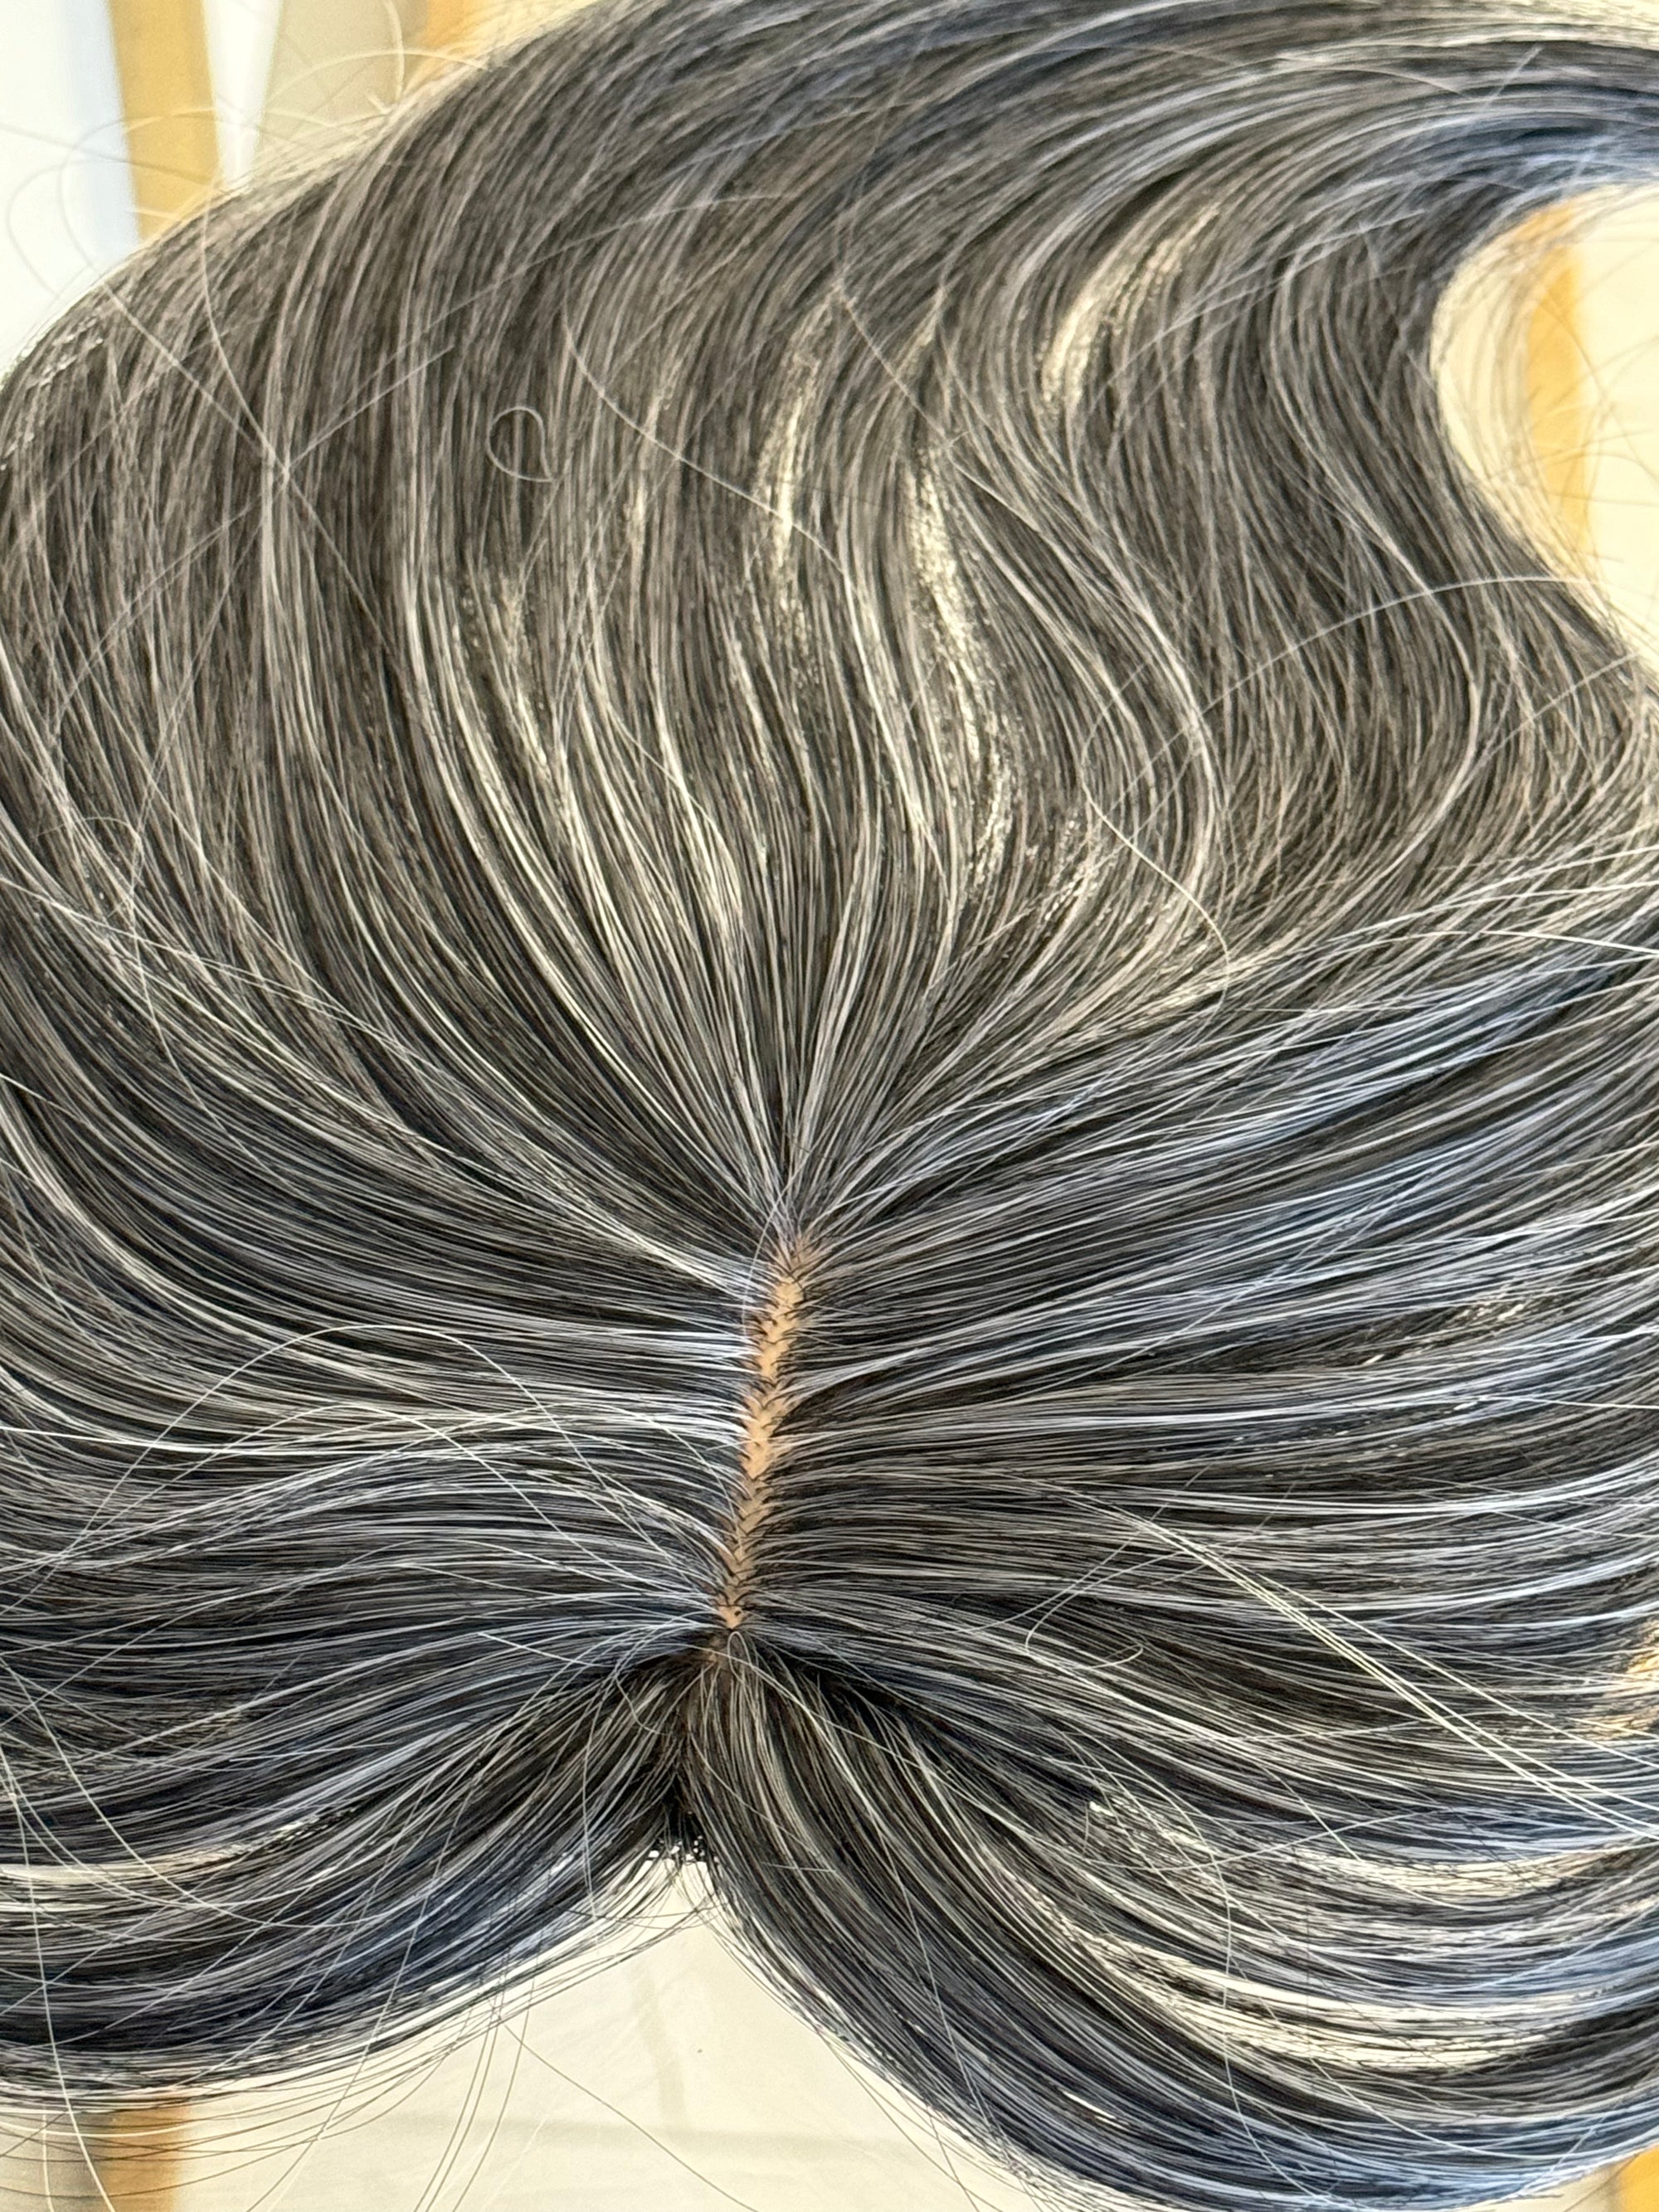 Tillstyle grey highlighted hair topper with bangs